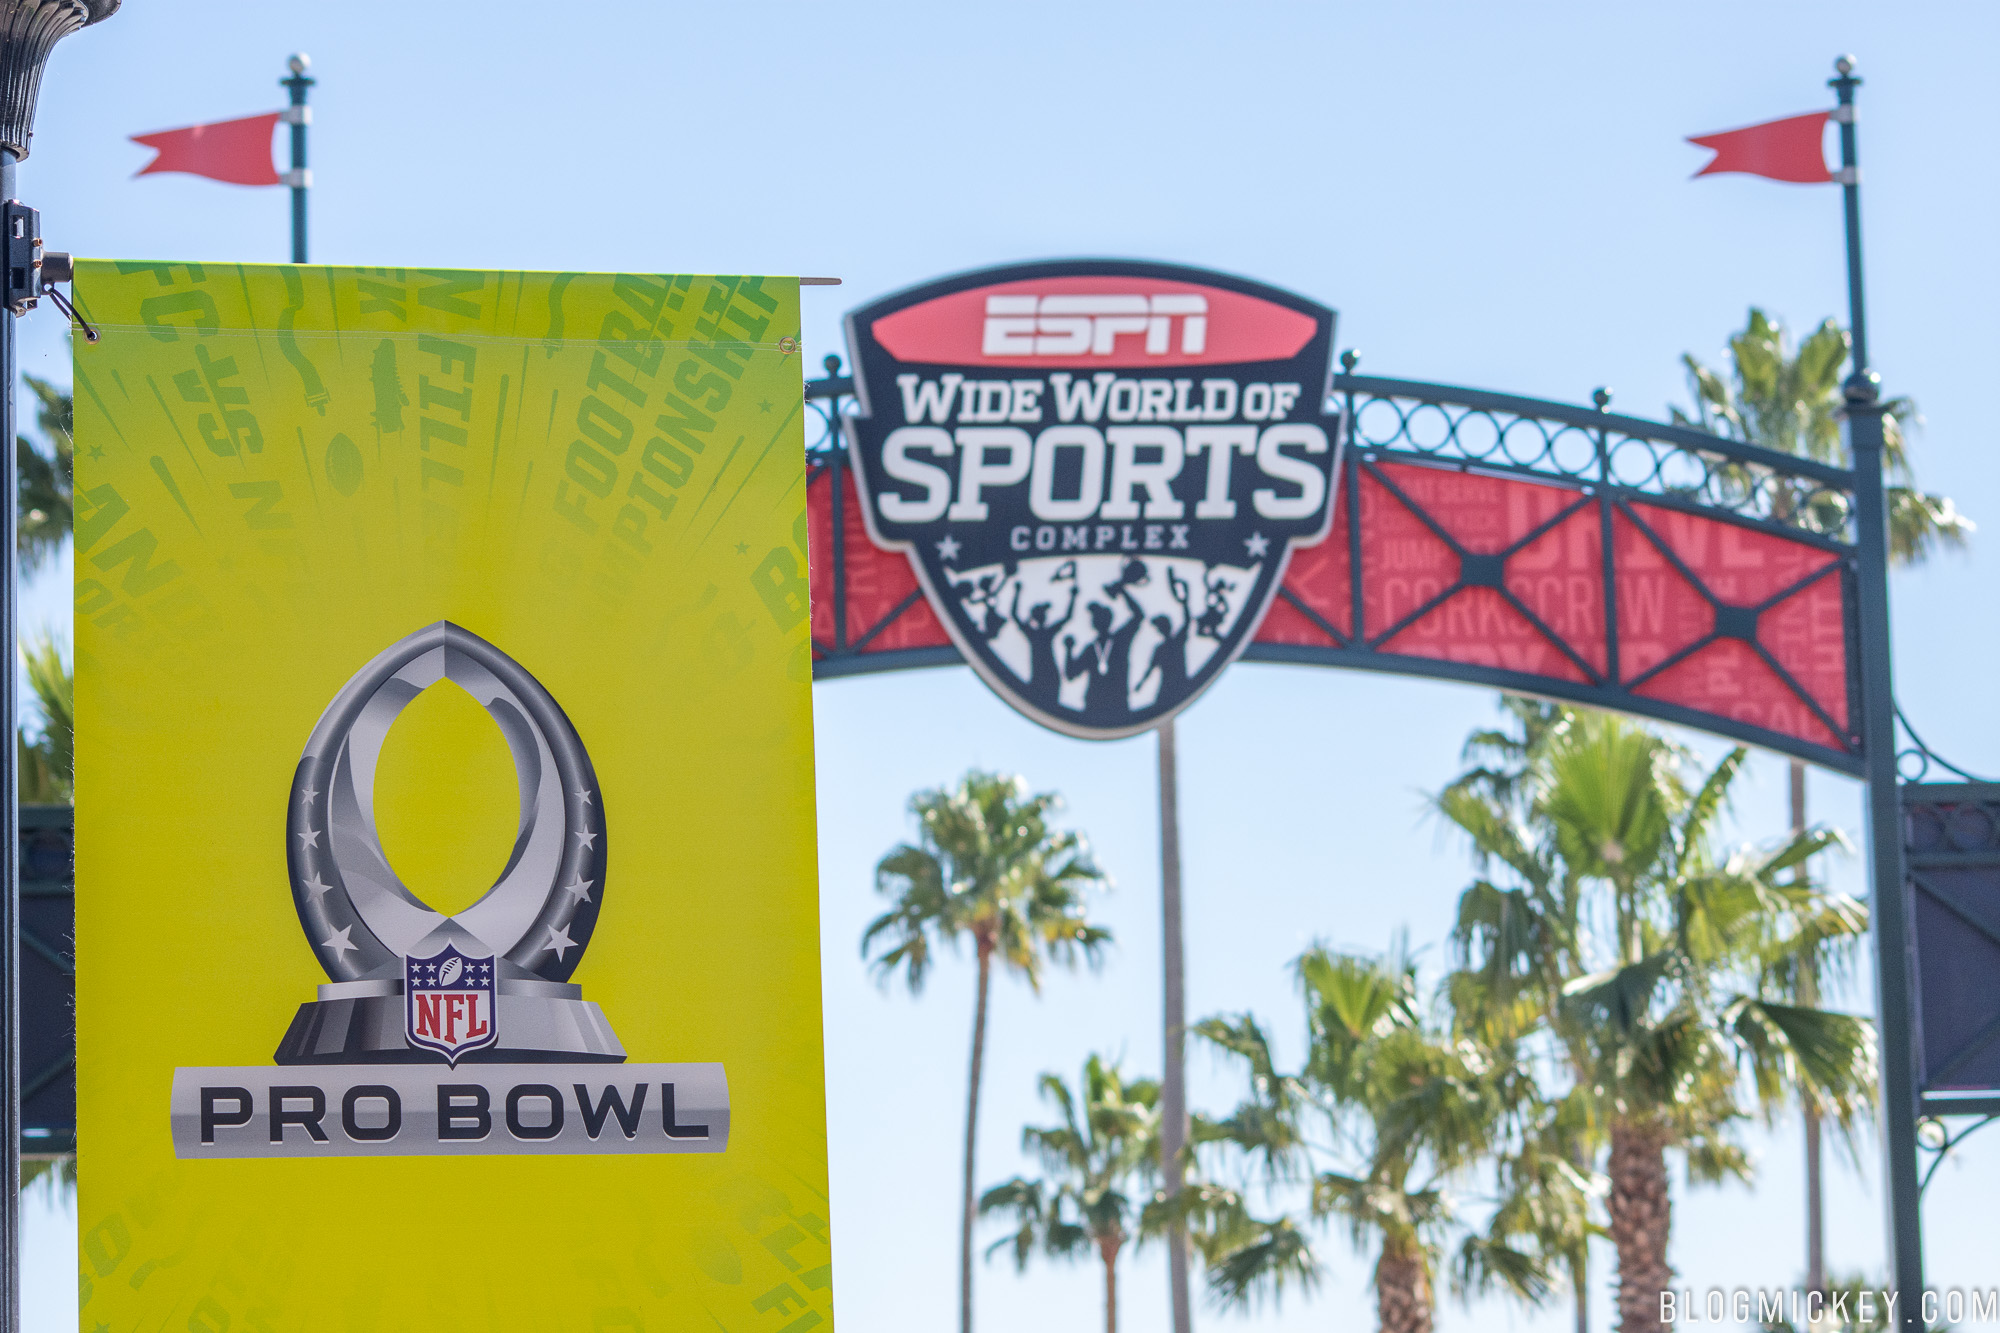 PHOTOS: NFL Pro Bowl Week Comes to ESPN Wide World of Sports - Blog Mickey